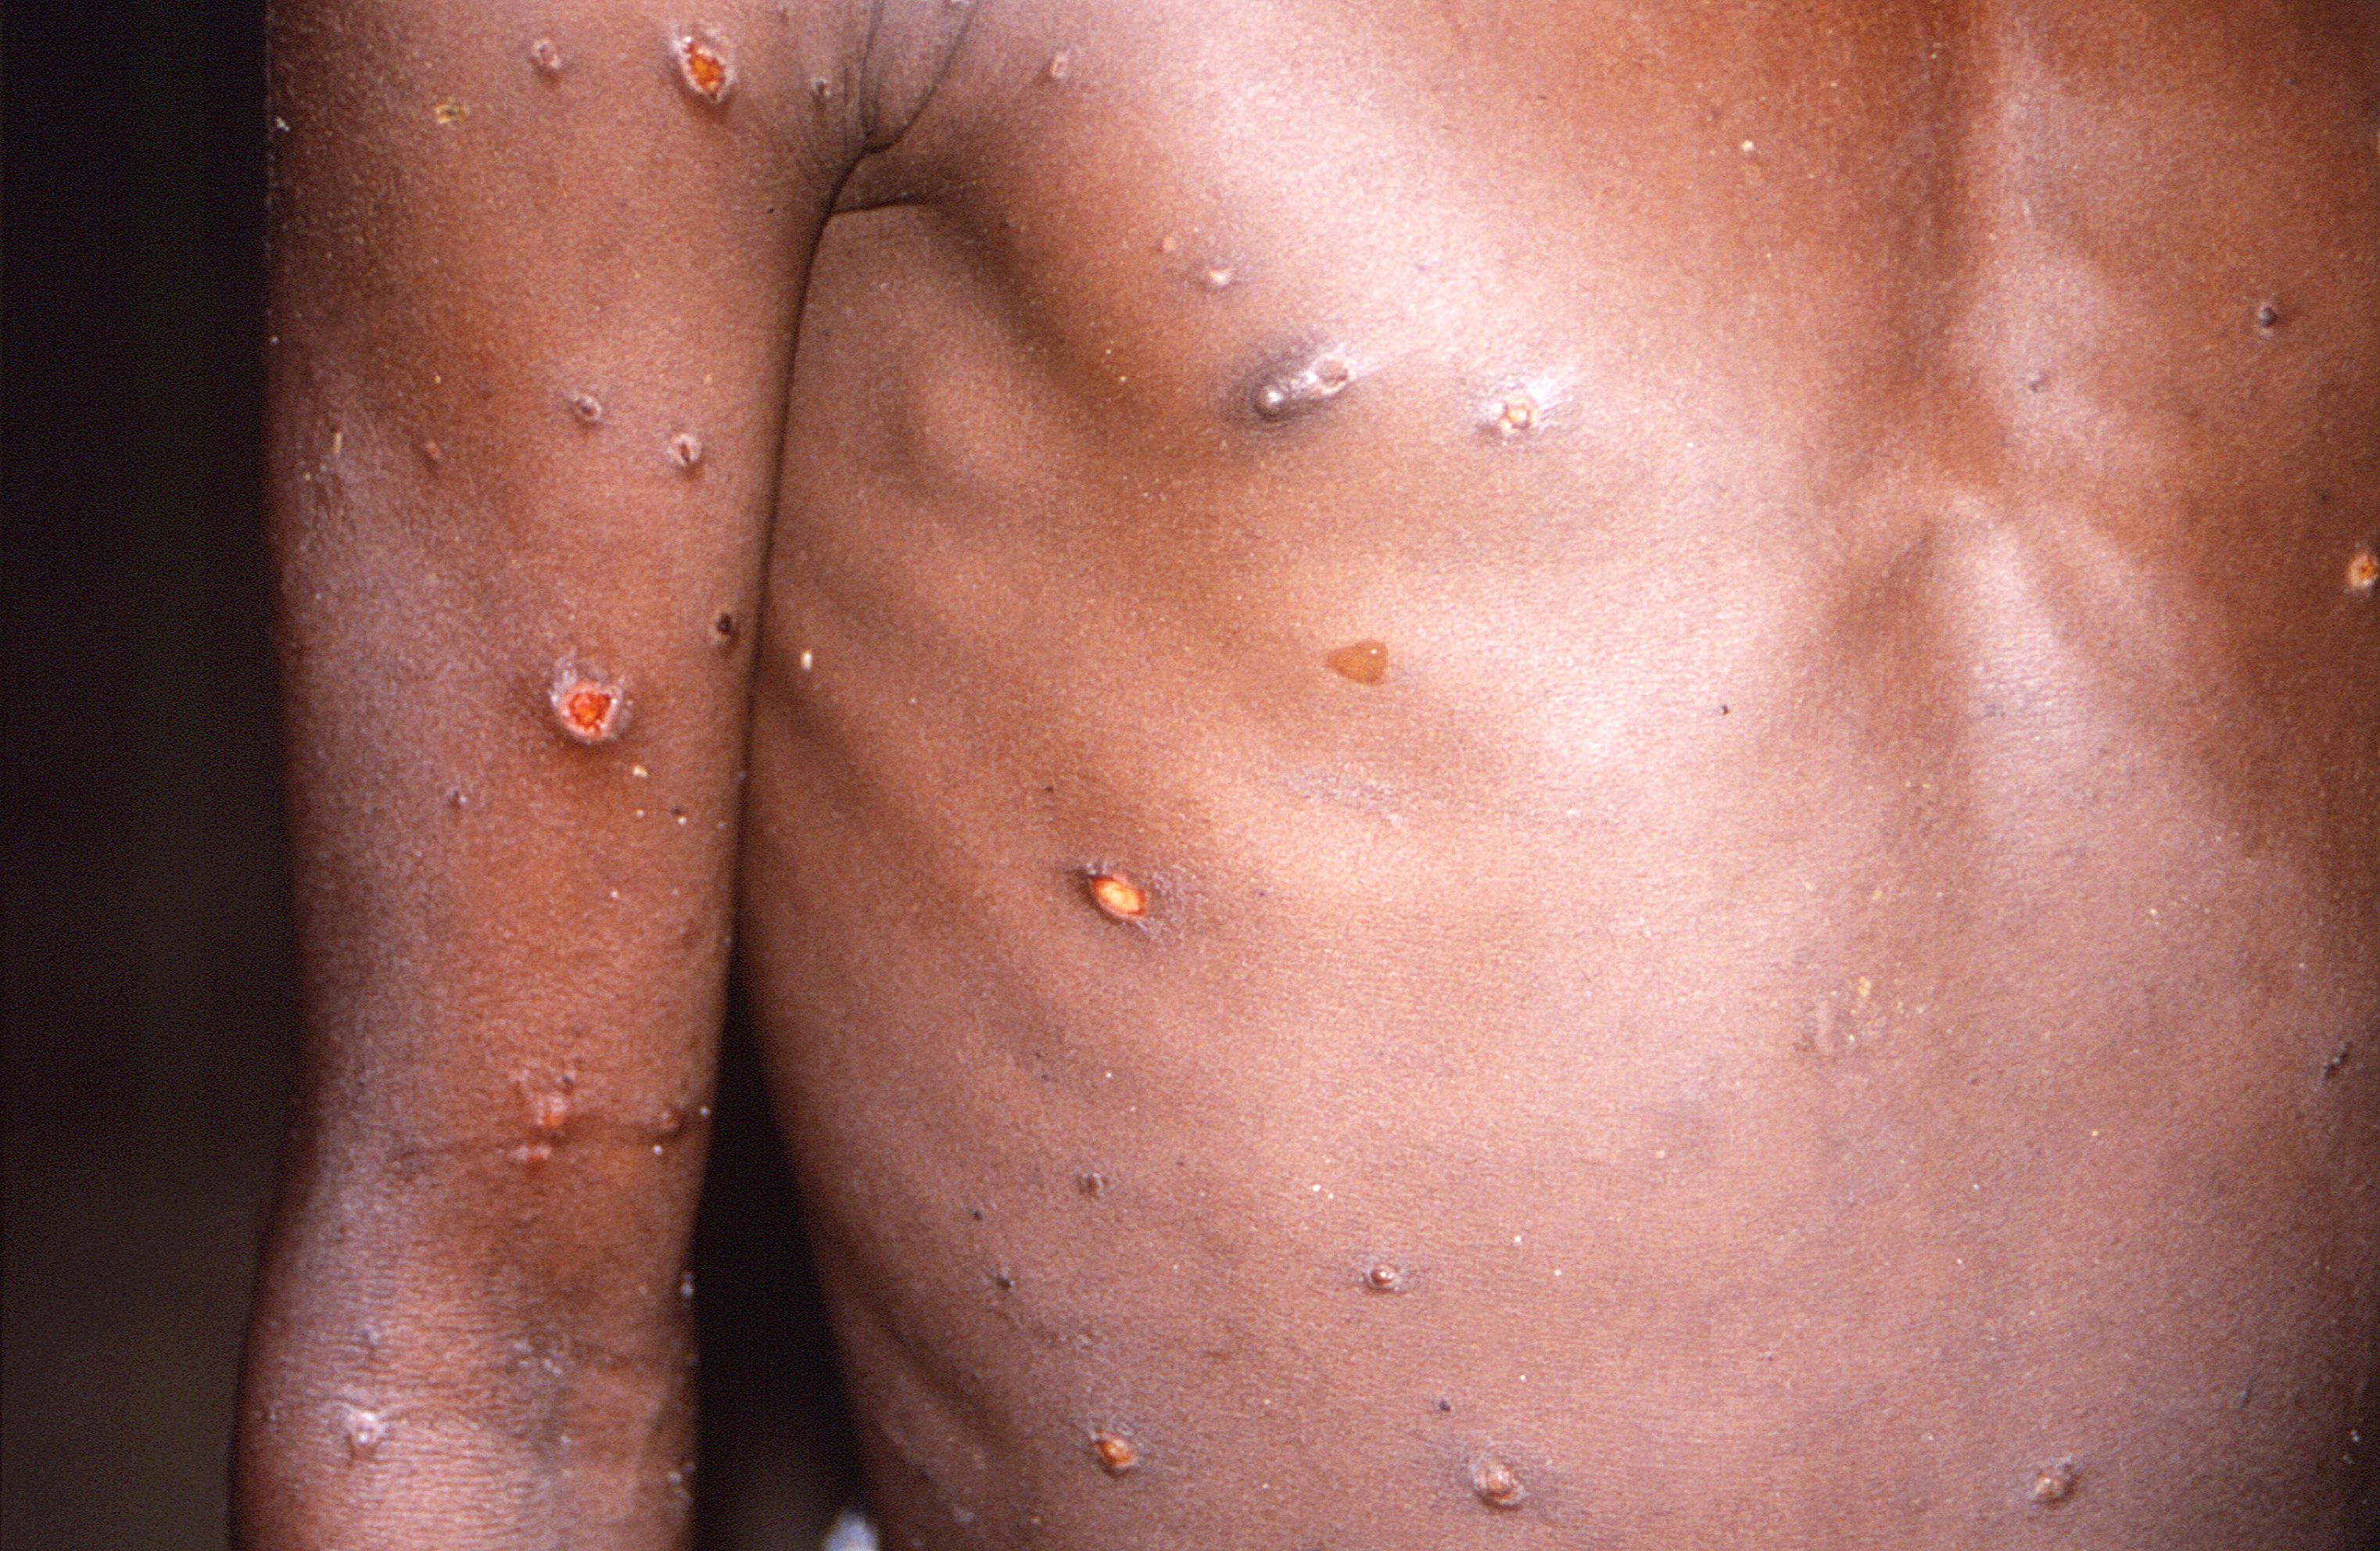 A CDC image shows skin lesions on a monkeypox patient